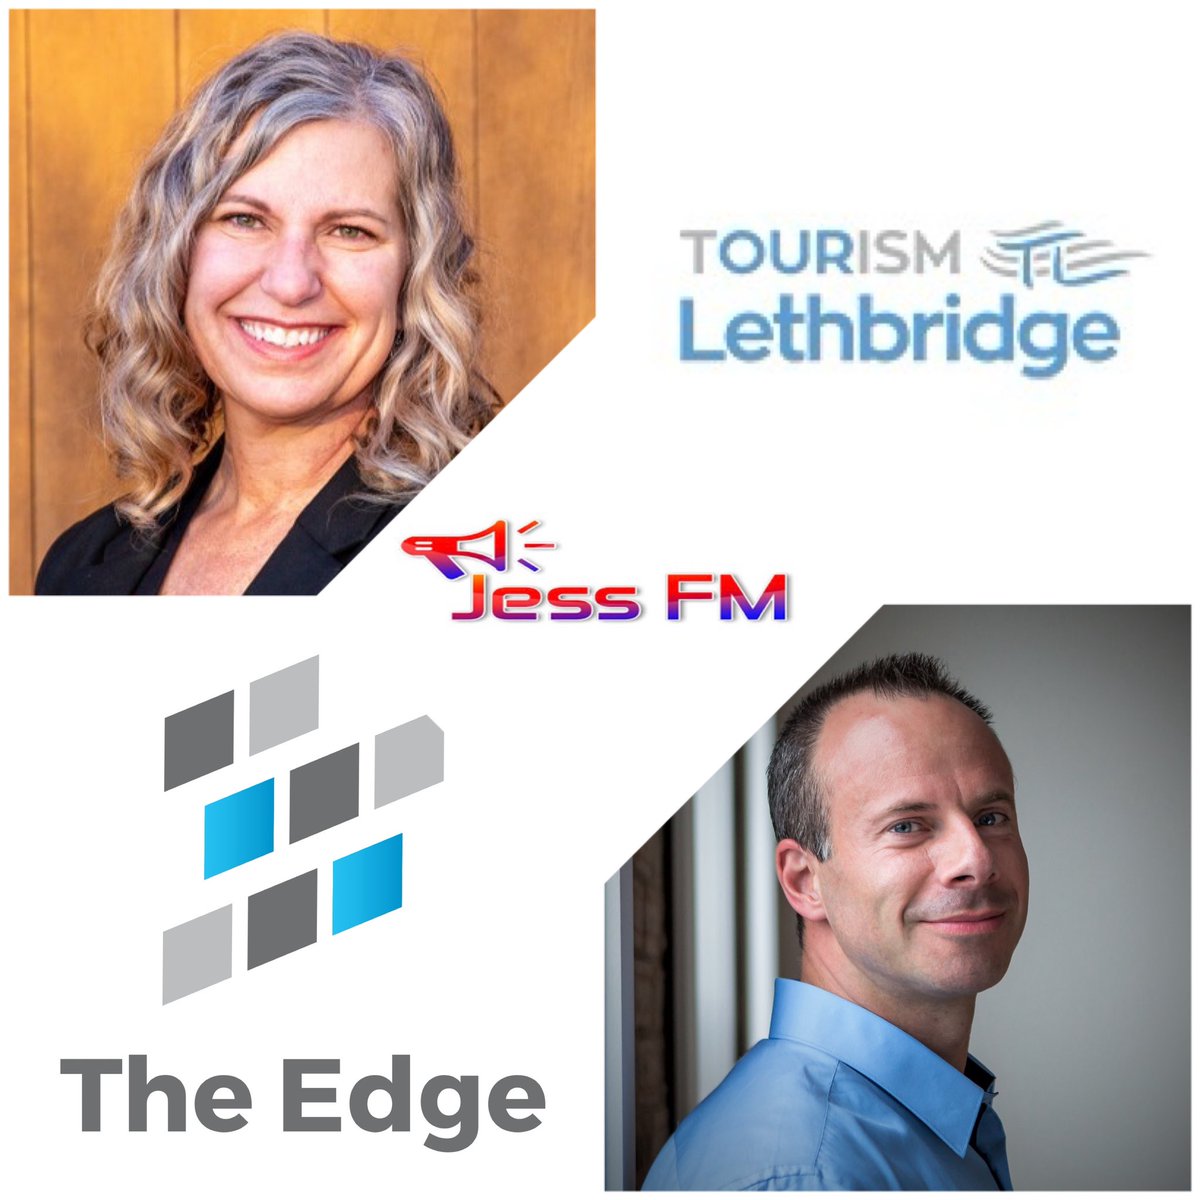 January’s episode of The Edge will feature @TourismLeth CEO @erinmelch. Join me on Thurs, January 18 at 6pm to learn more about Erin’s journey & her plans to grow the region’s visitor economy. Watch Jess TV live at jessfm.ca & on YouTube. #YQL